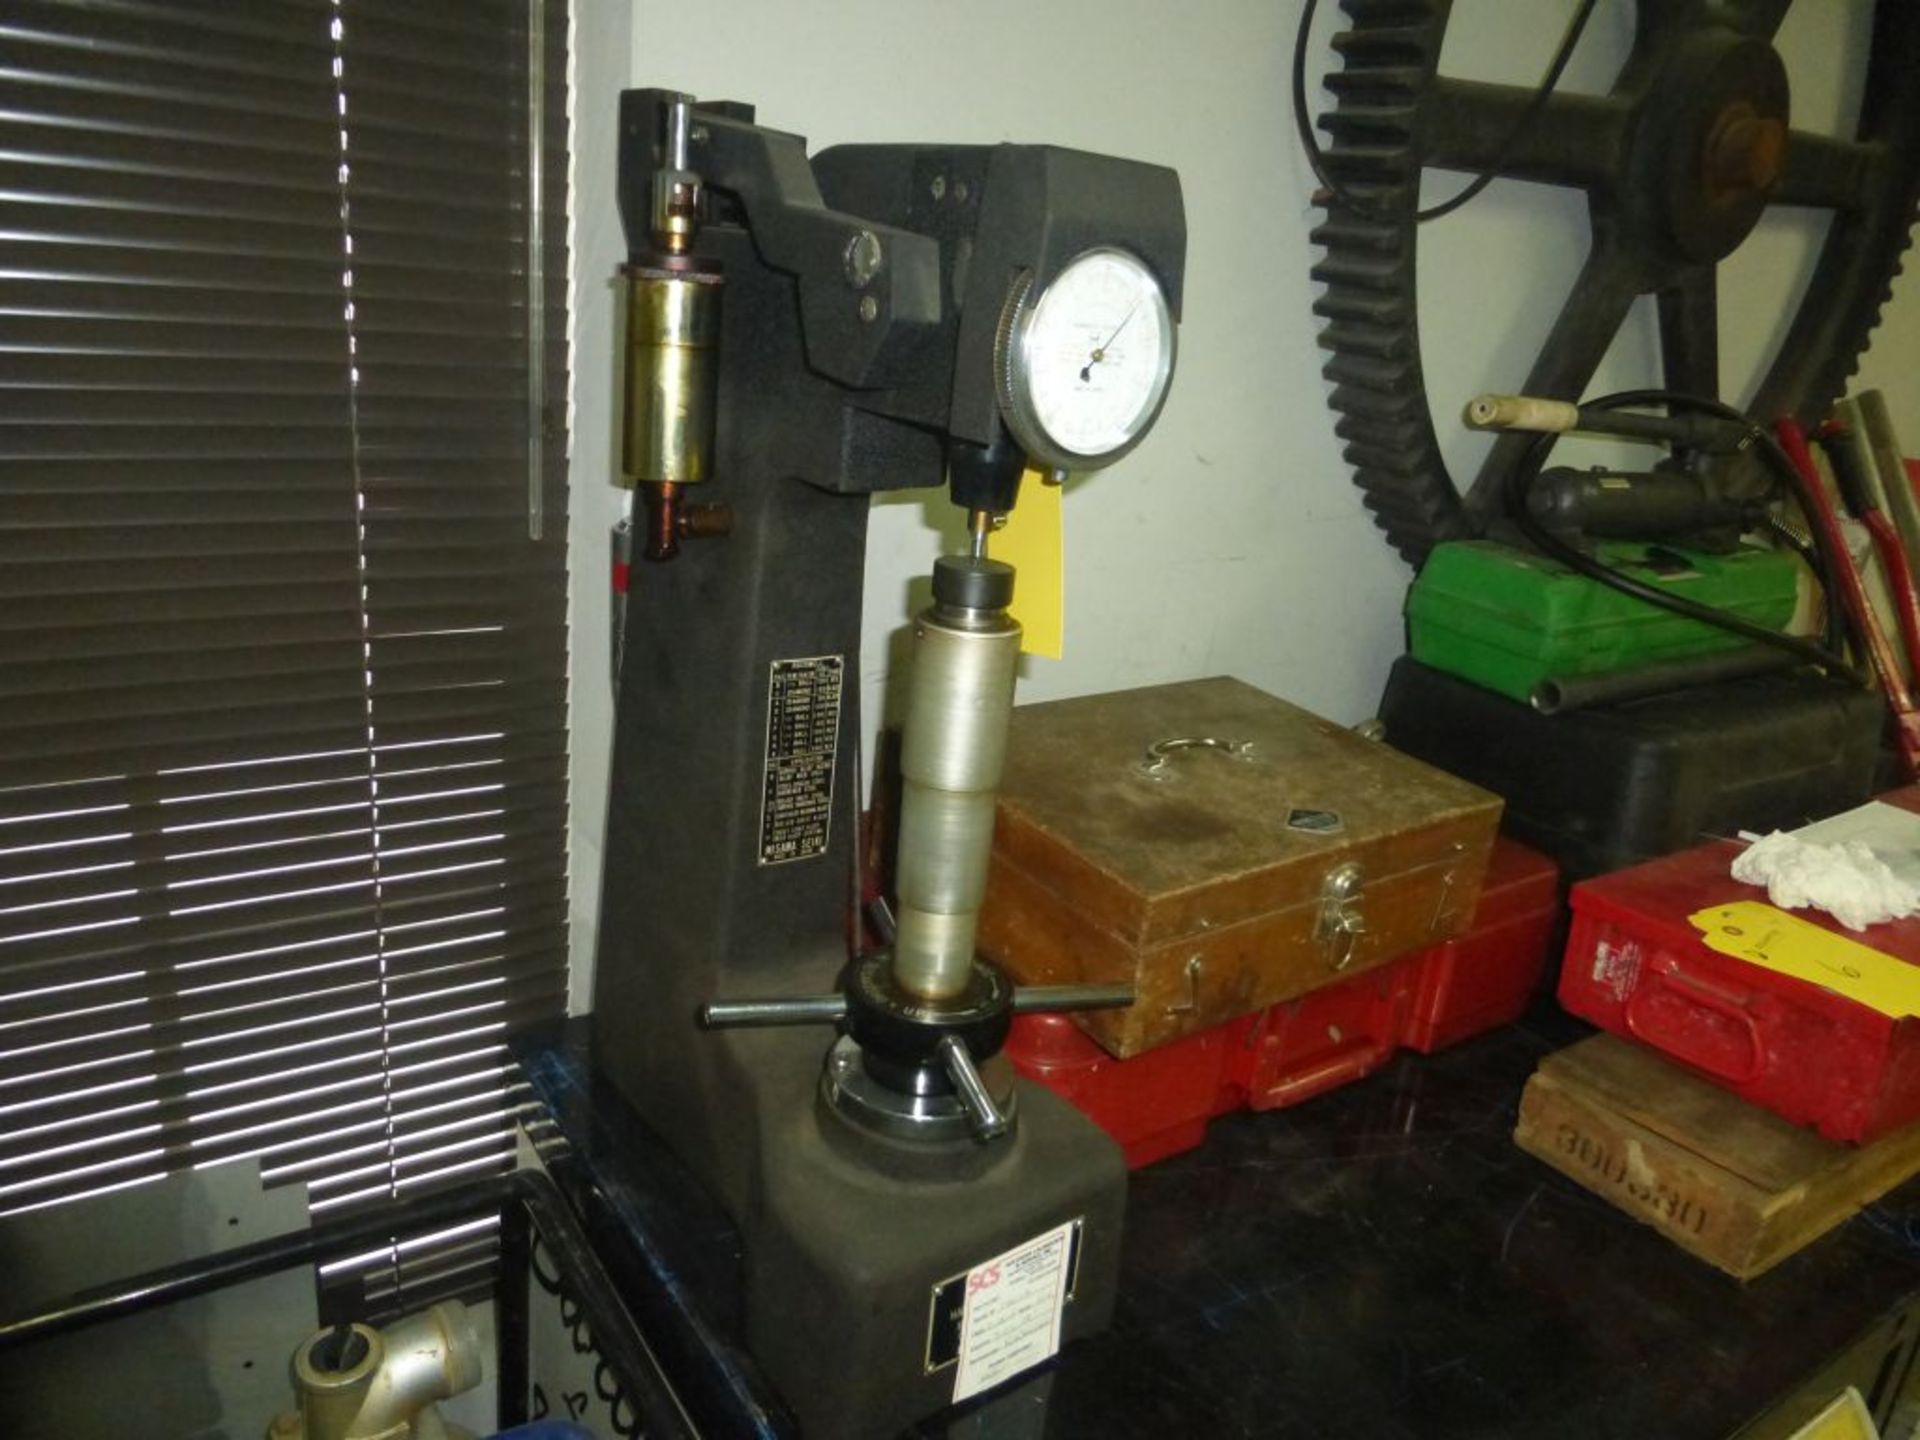 Misawa Seiki Hardness Tester|Includes Wood Box Containing Weights and Accessories